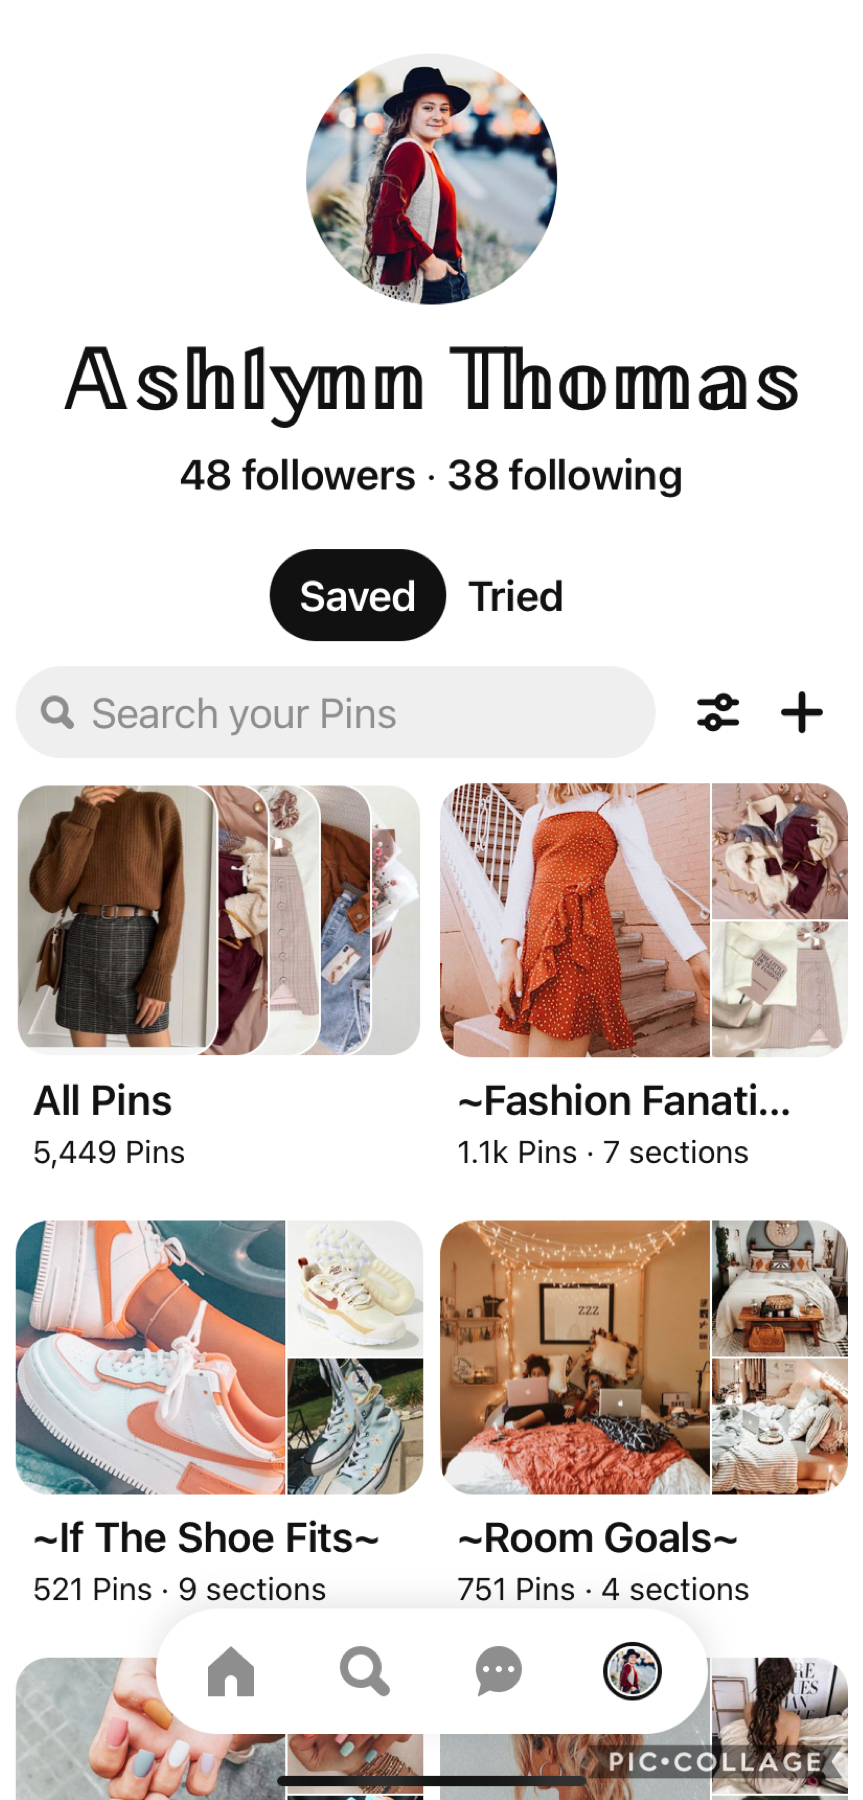 For more and better content follow me on Pinterest! Anyone that screenshots my Pinterest account and follows gets a shoutout and huge spam!